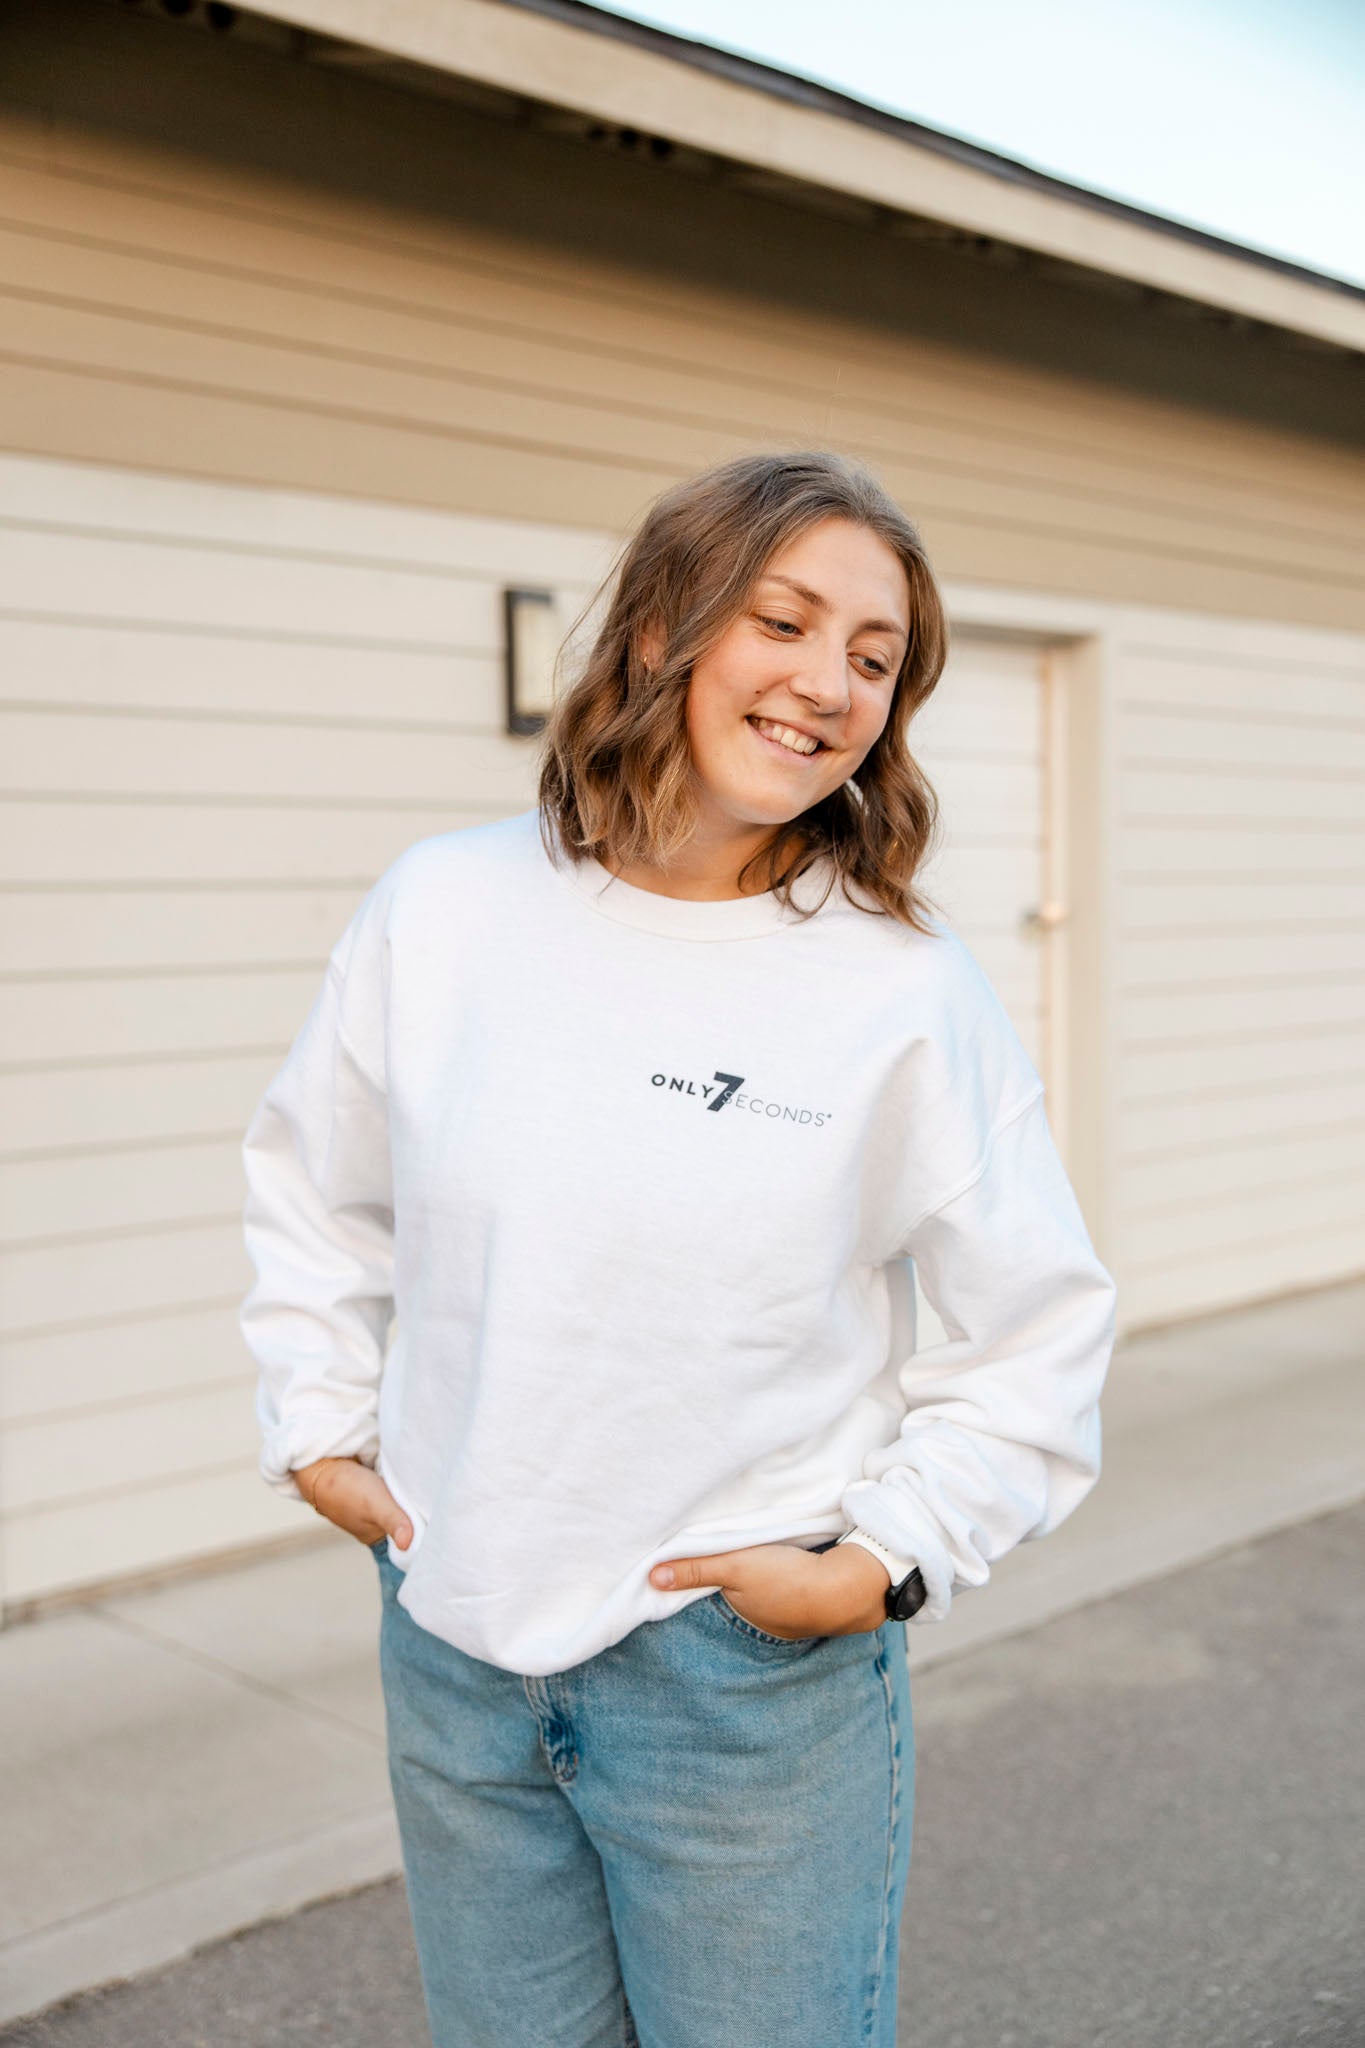 Not Alone In Your Story Crewneck, Black - Only7Seconds Shop